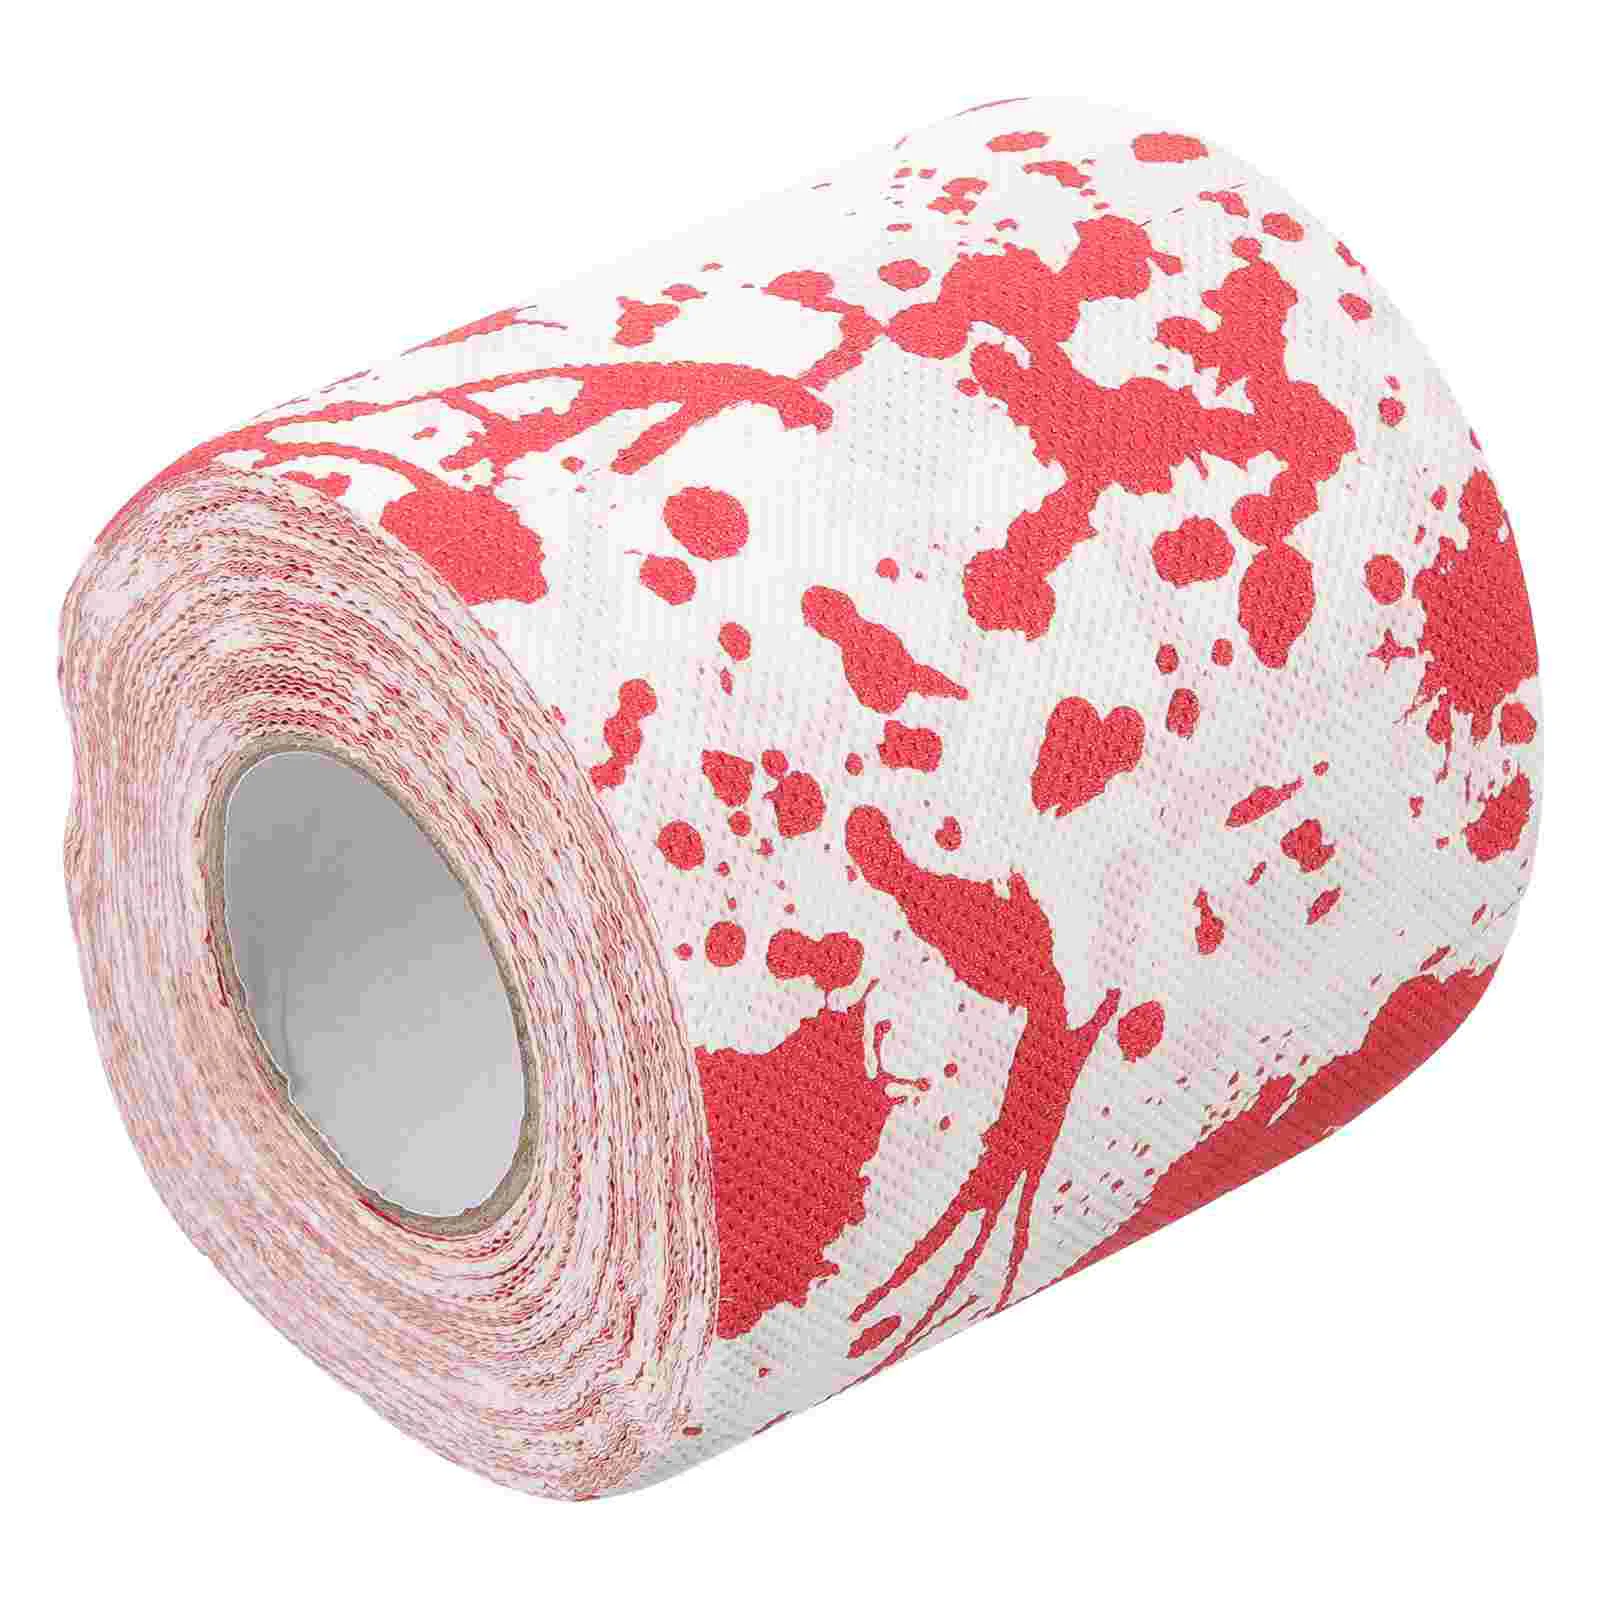 

1 Roll Bloodstain Toilet Paper Scary Printed Roll Paper Roll Paper Bathroom Toilet Paper Roll